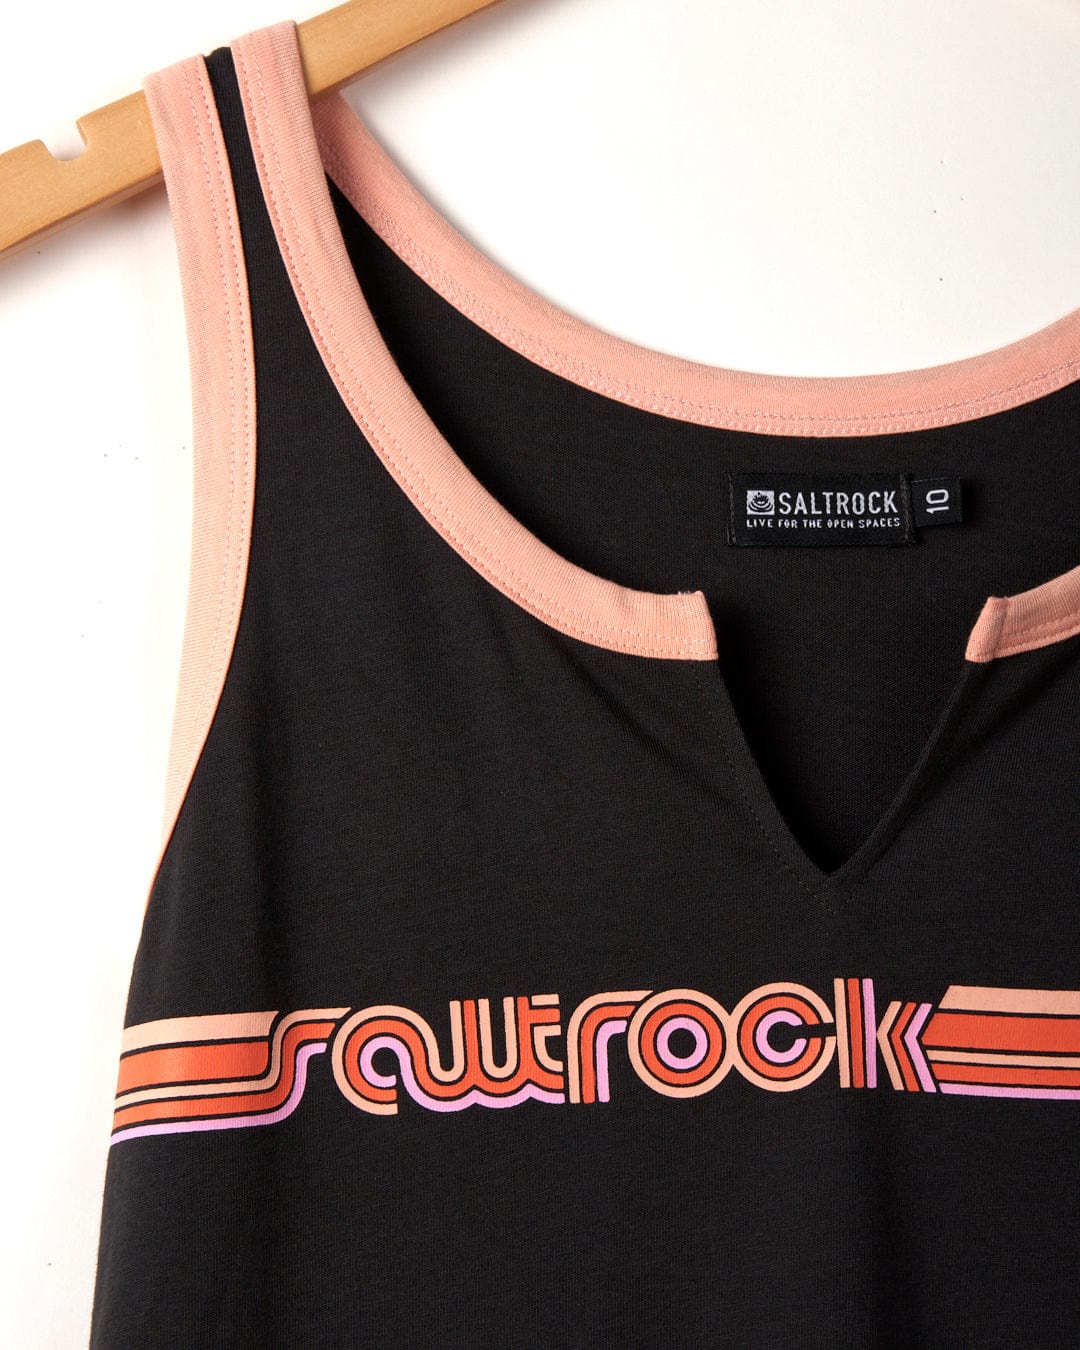 Retro Ribbon - Womens Vest - Dark Grey tank top with pink trim hanging on a wooden hanger, featuring the Saltrock logo in pink and orange on the chest, made from 100% cotton.